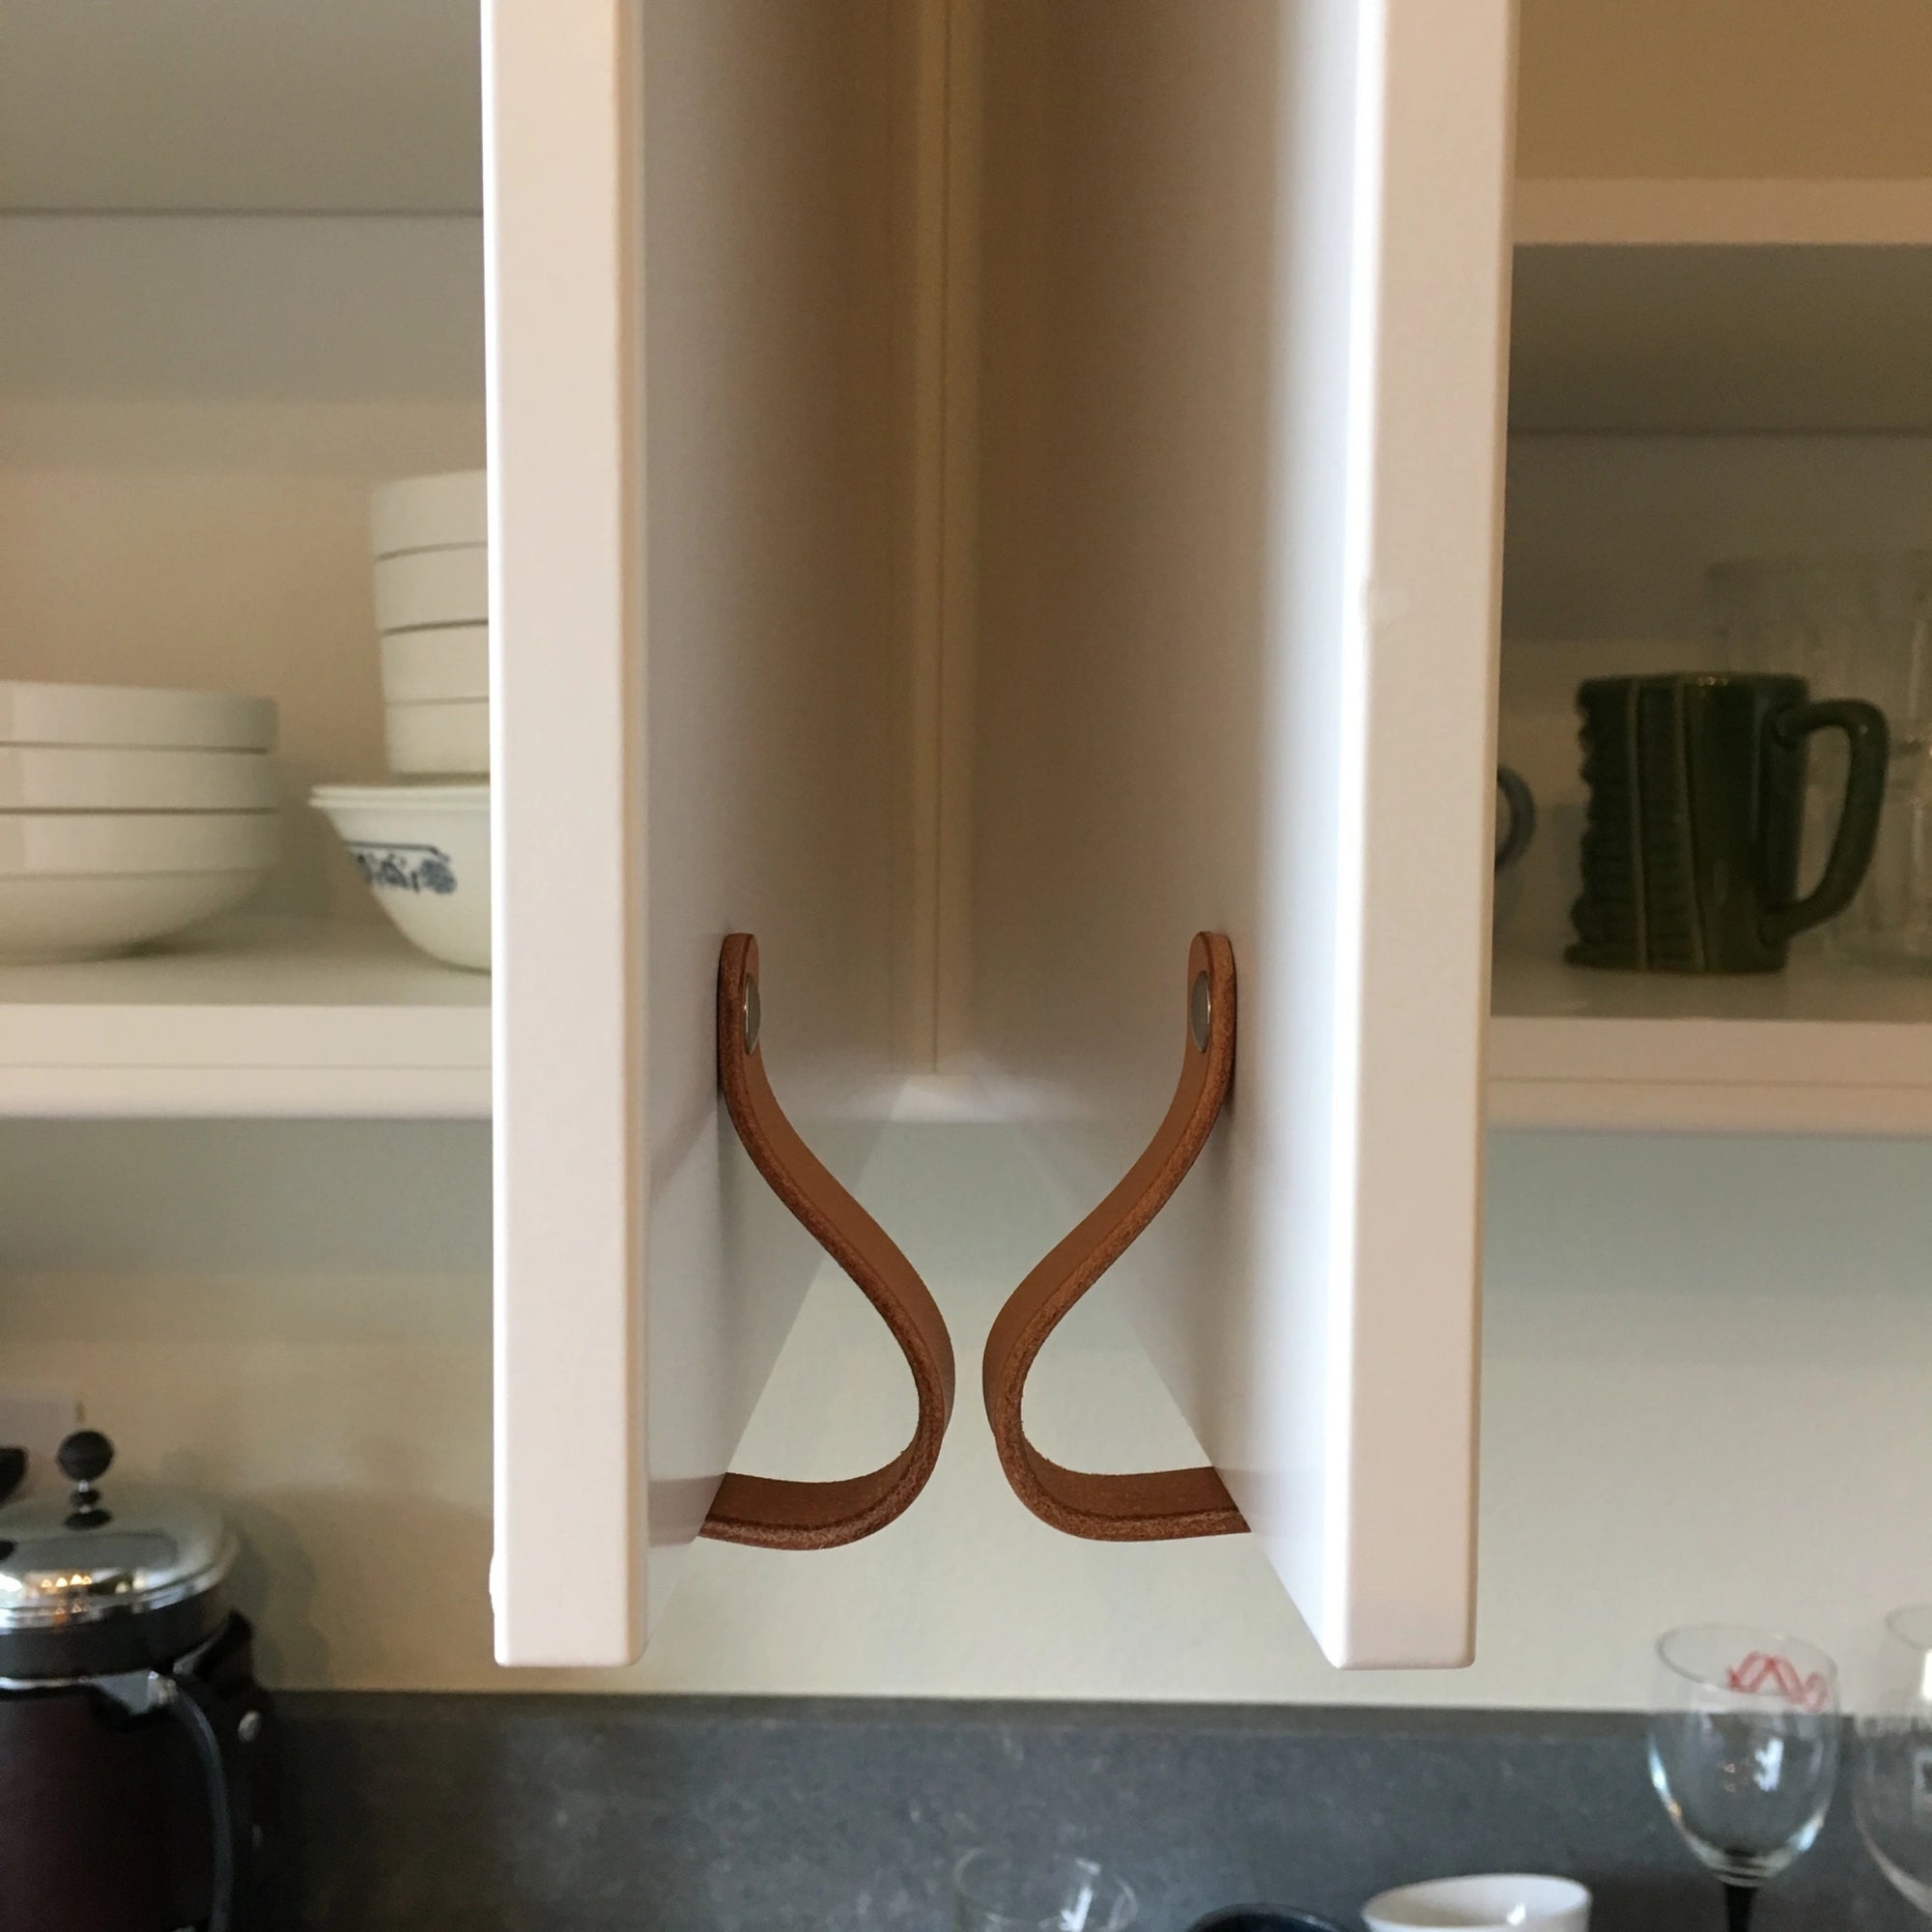 Two cabinet doors swinging open towards each other with matching leather Lovejoy loop handles. The leather touches so the cabinets don't crash into each other, a solution for problem corners in kitchen design planning